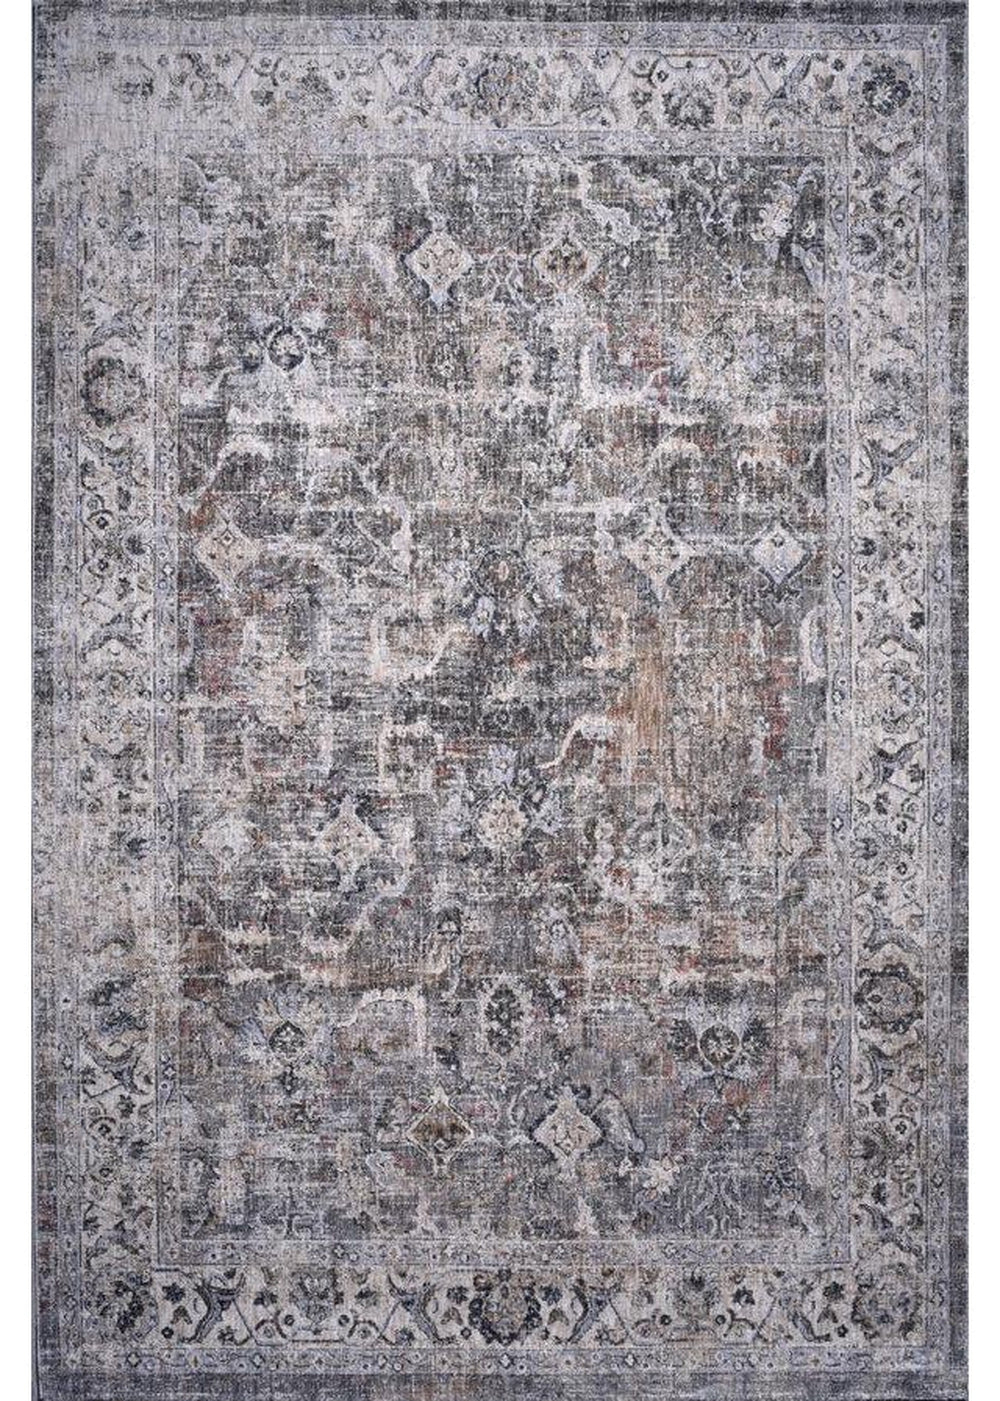 Baron Jade Woven Rug-Area rug for living room, dining area, and bedroom